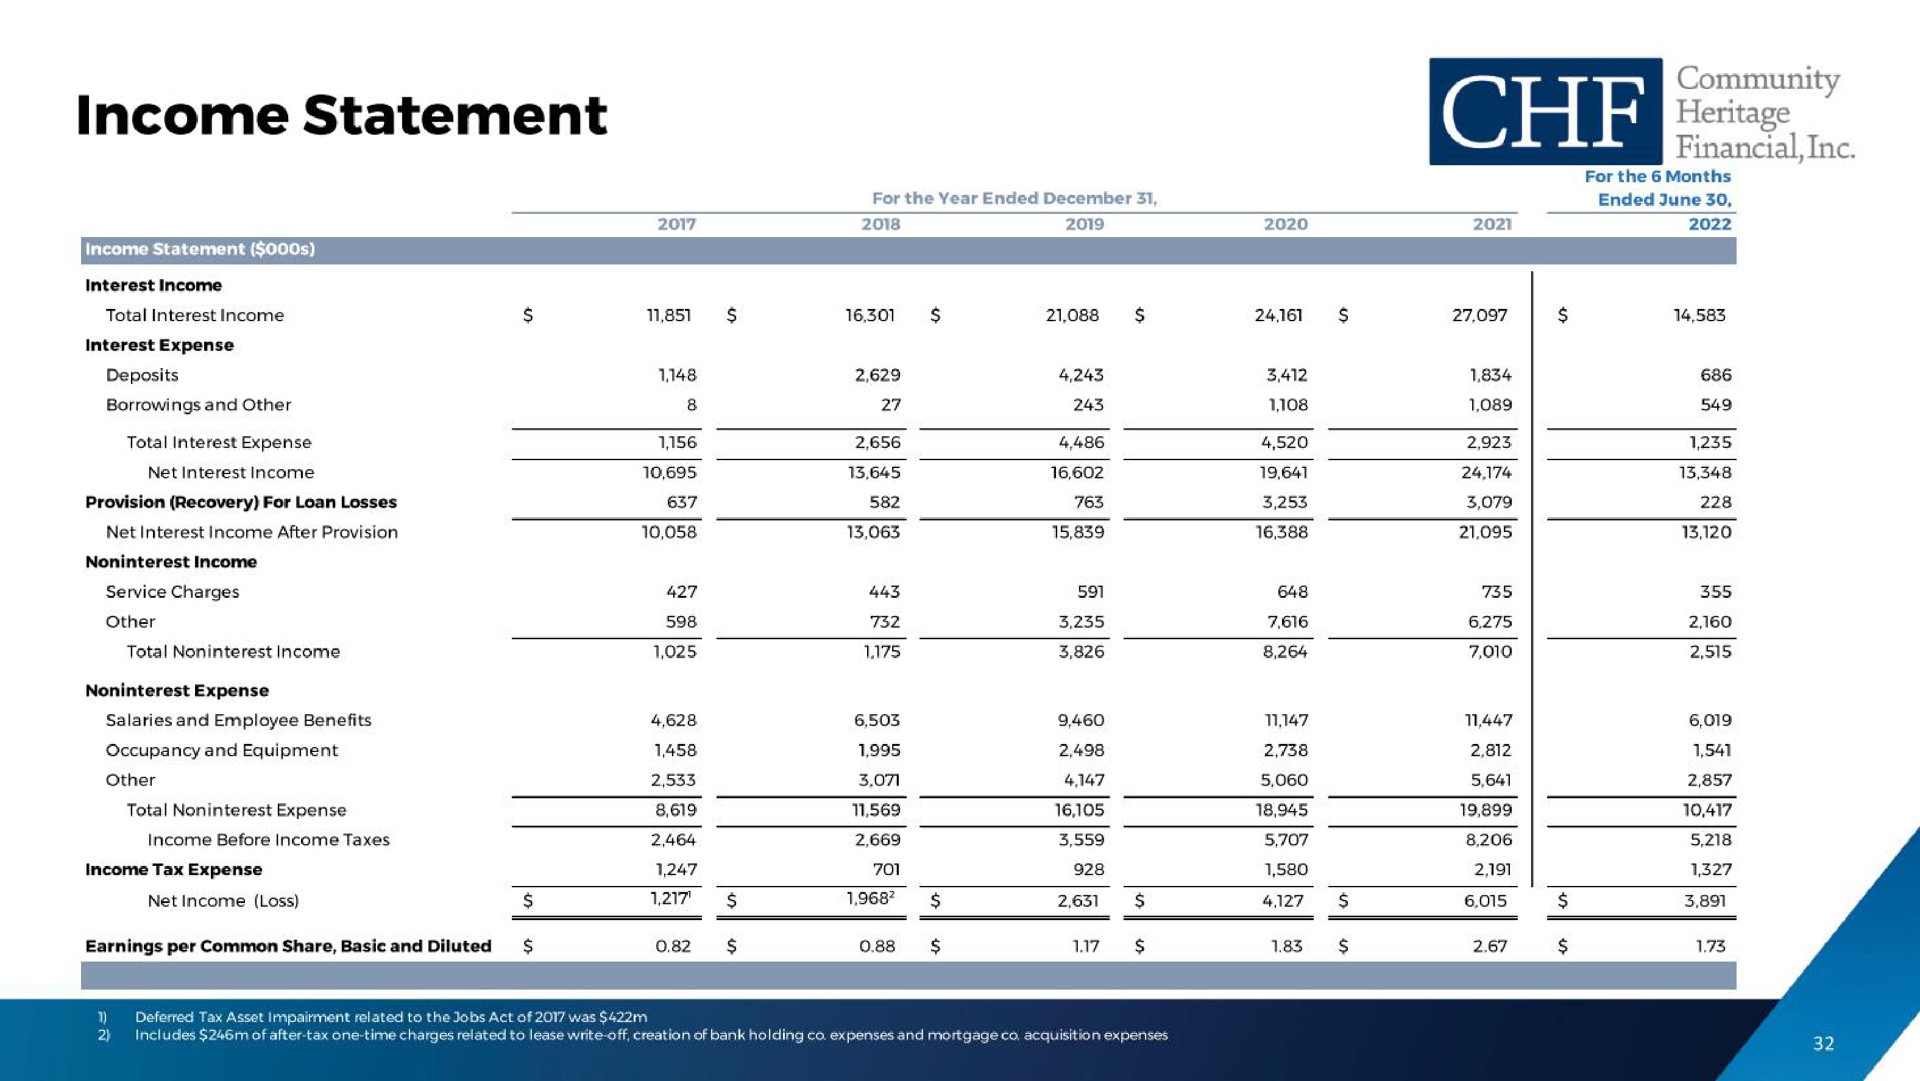 income statement | Community Heritage Financial